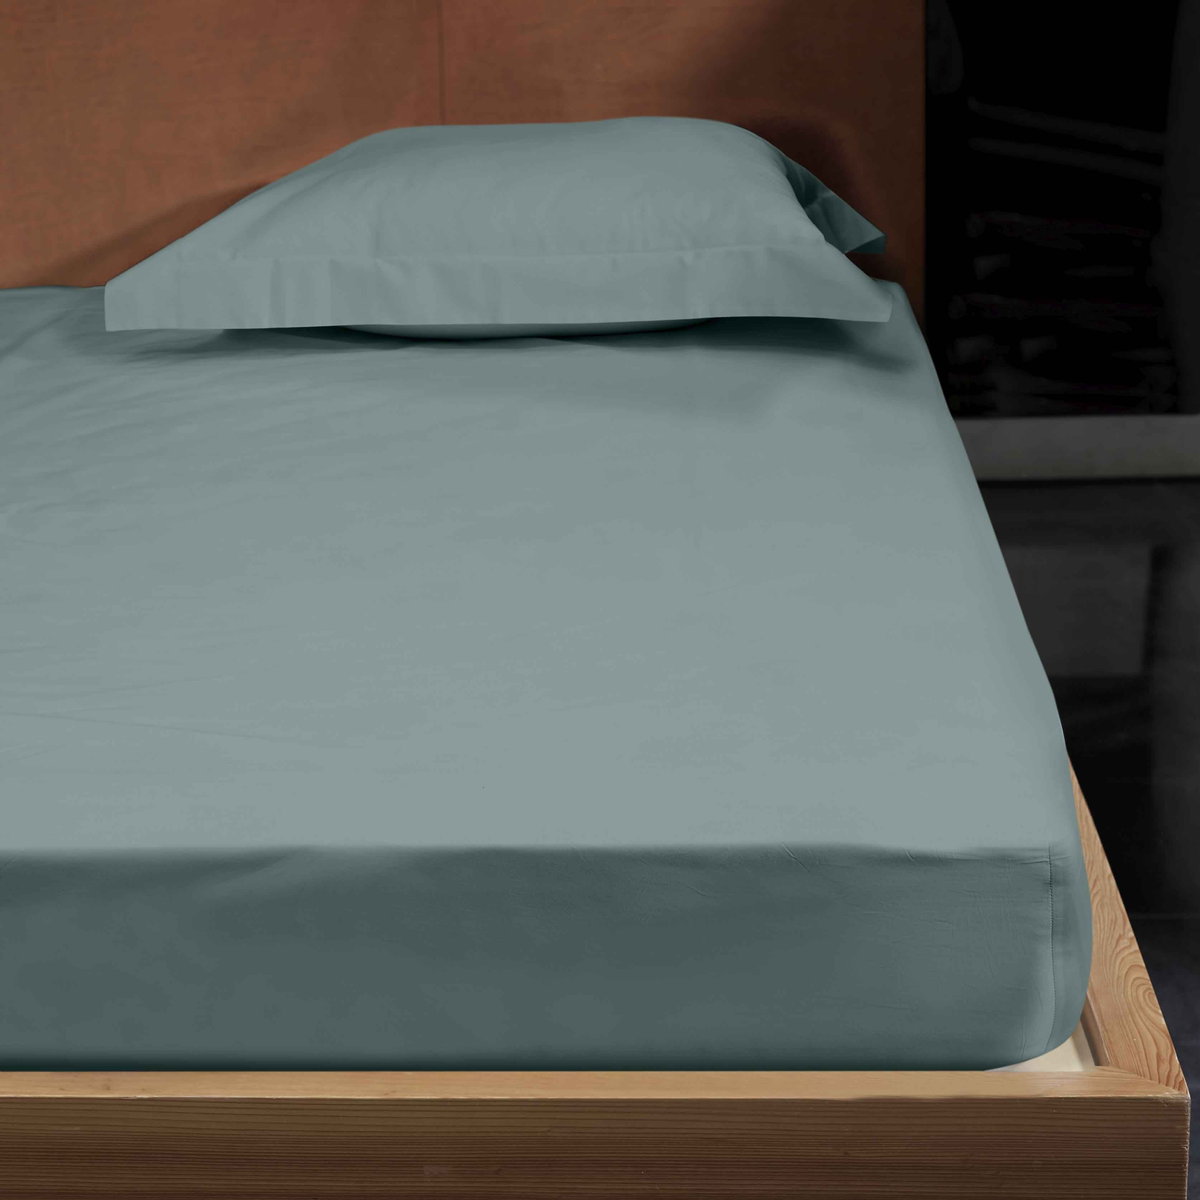 Fitted Bed Sheet of Signoria Gemma Bedding in Wilton Blue Color